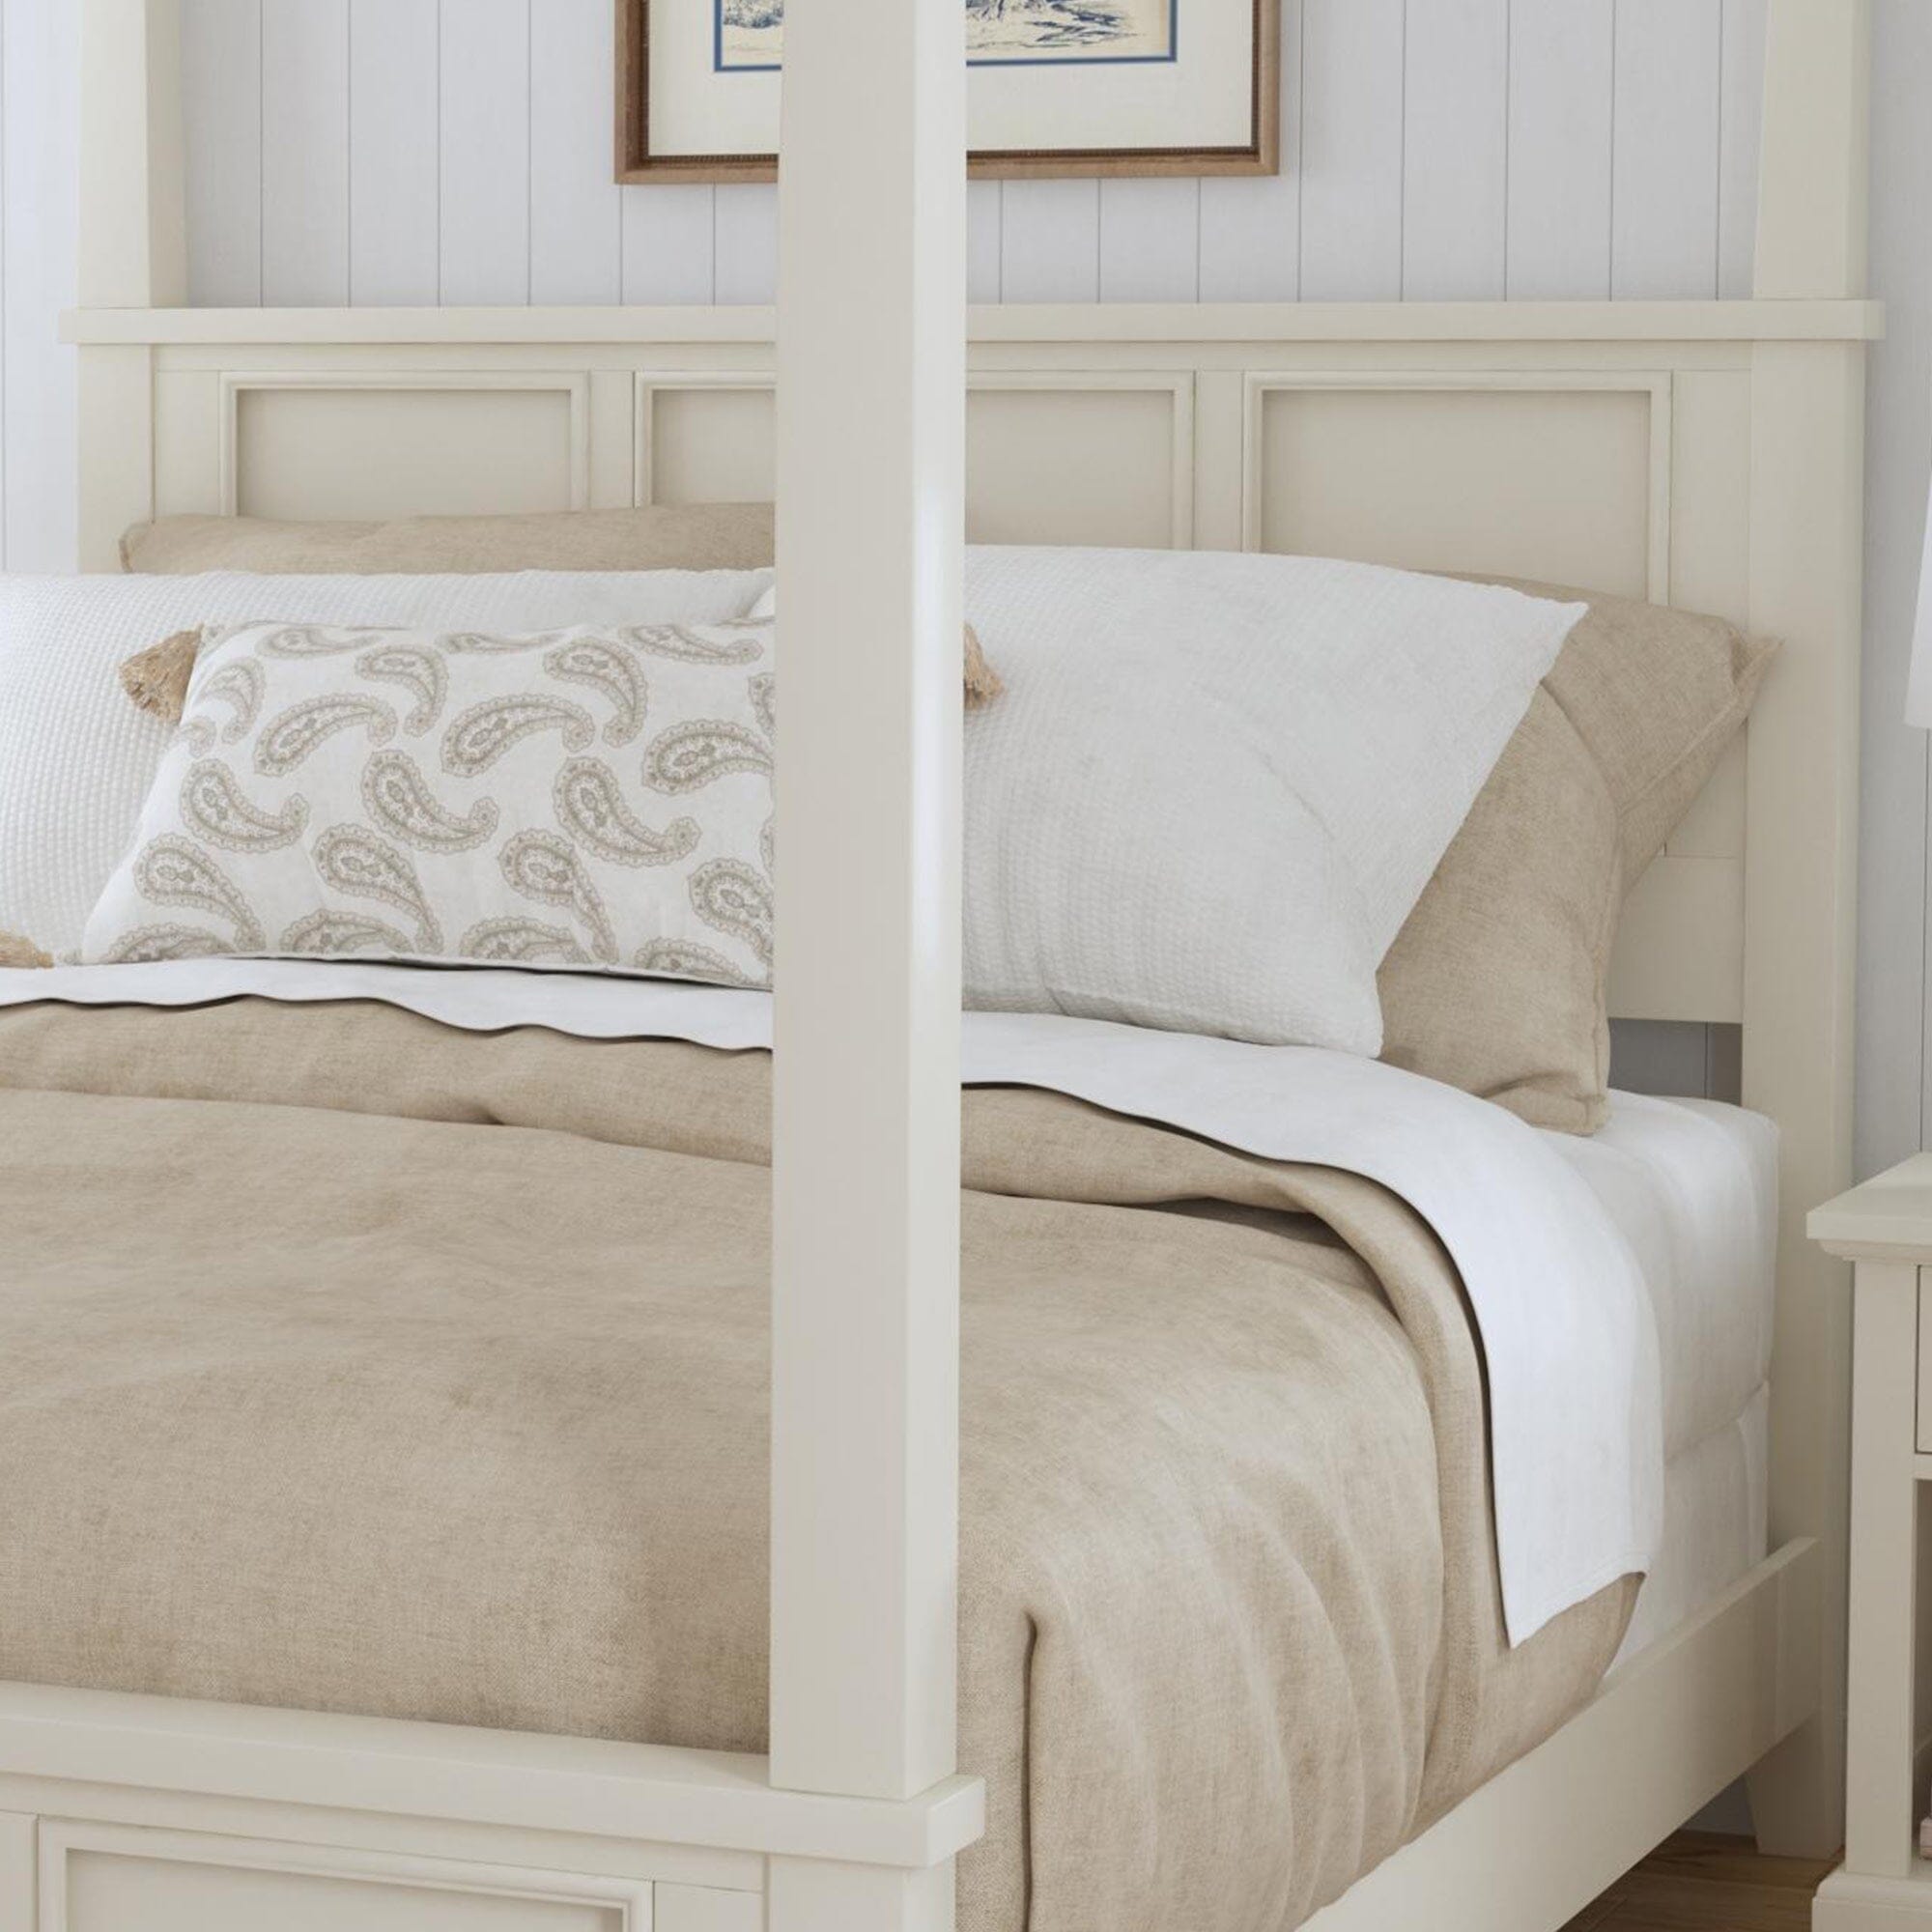 Traditional Queen Canopy Bed By Naples Queen Bed Naples